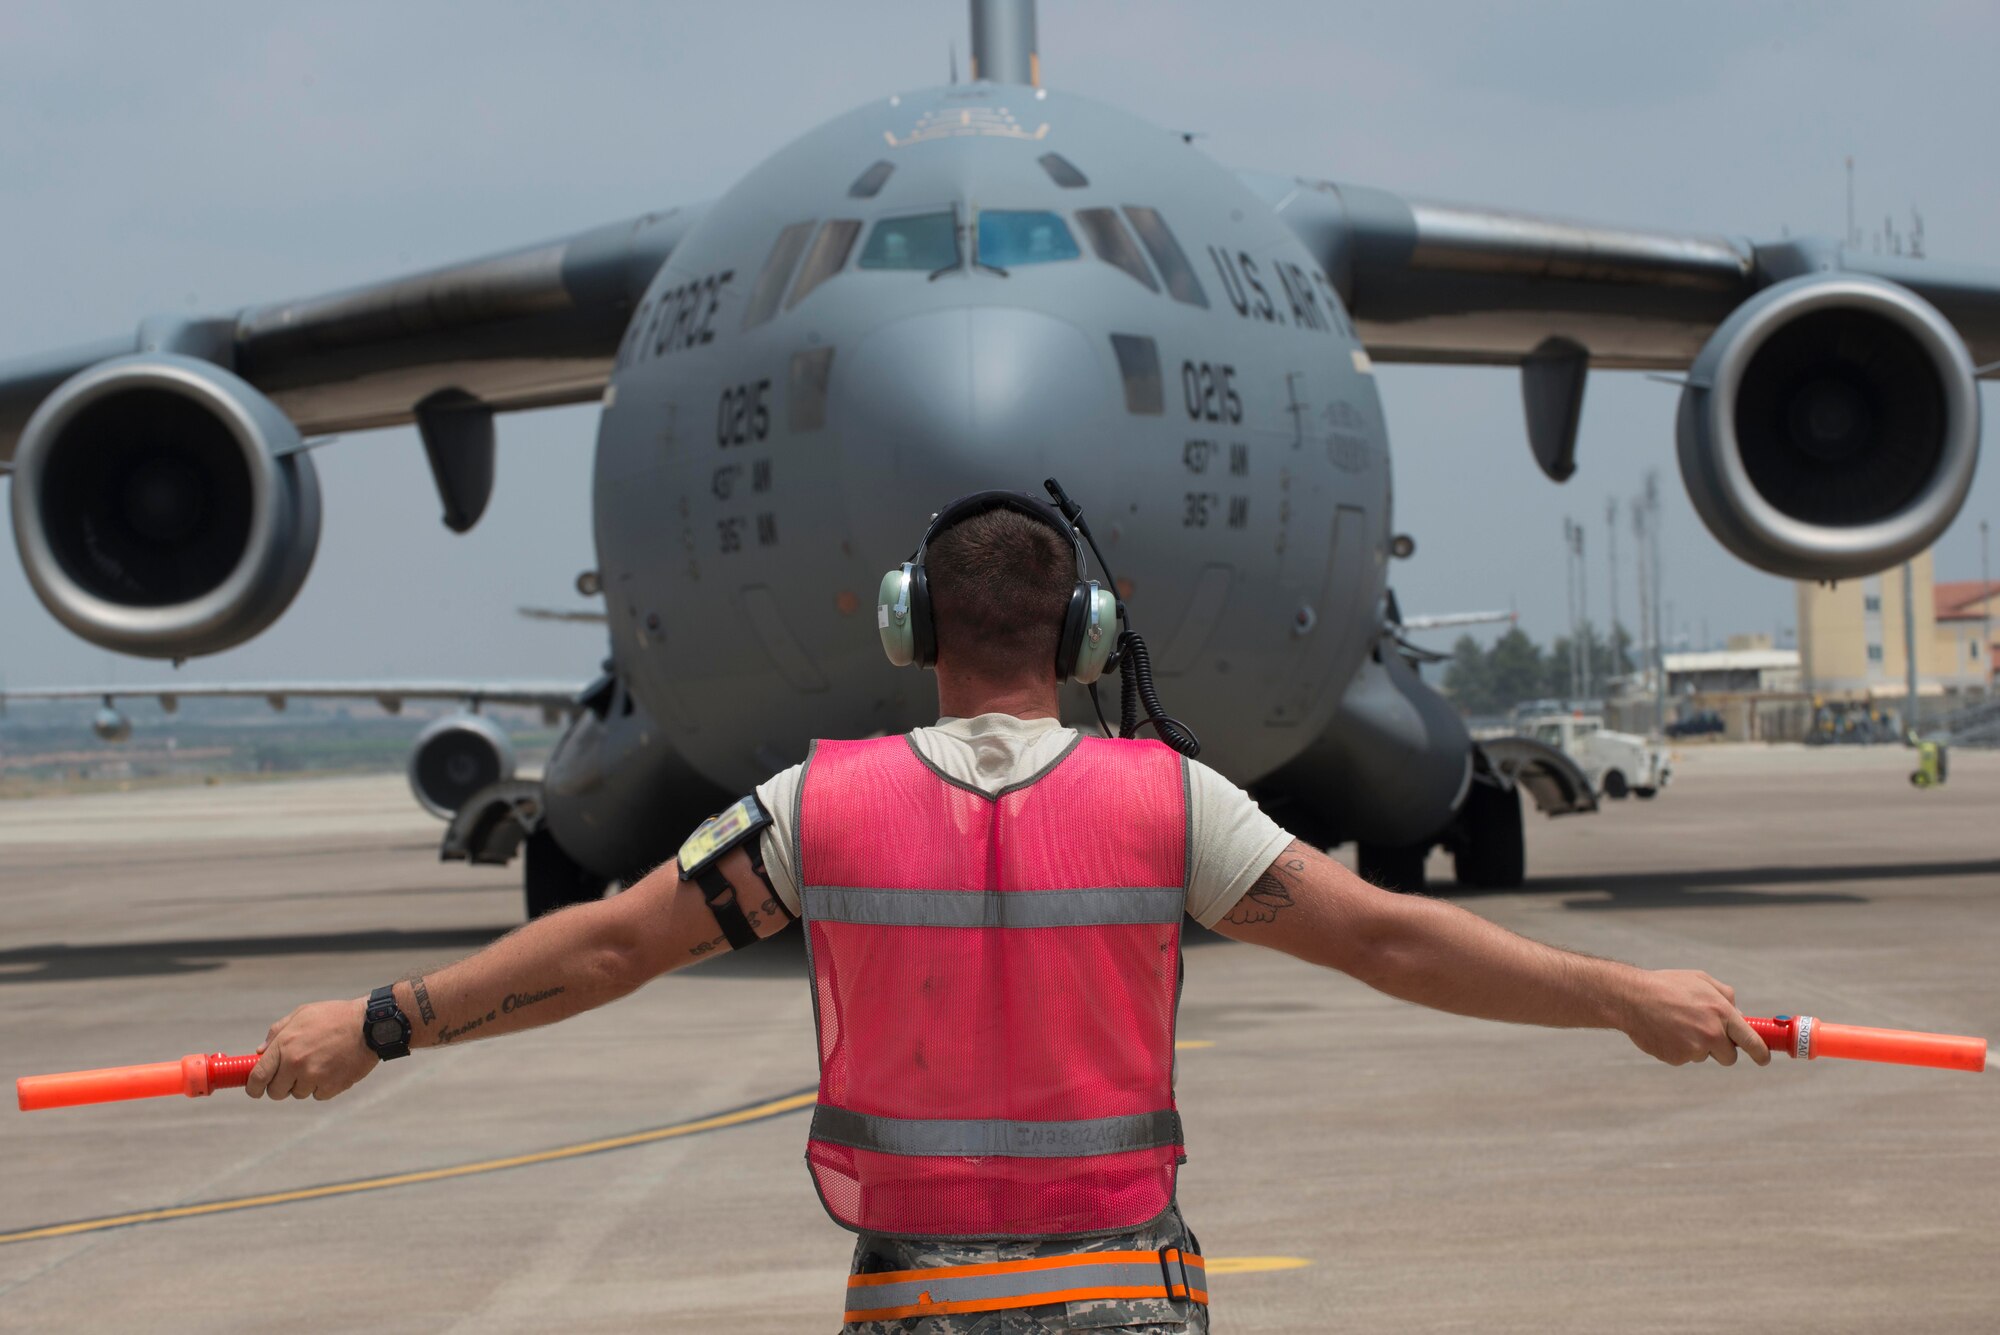 An Airman from the 728th Air Mobility Squadron marshals in a C-17 Globemaster III July 22, 2016, at Incirlik Air Base Turkey. The C-17 carried fuel bladders that were distributed for operations at Incirlik Air Base. (U.S. Air Force photo by Senior Airman John Nieves Camacho)